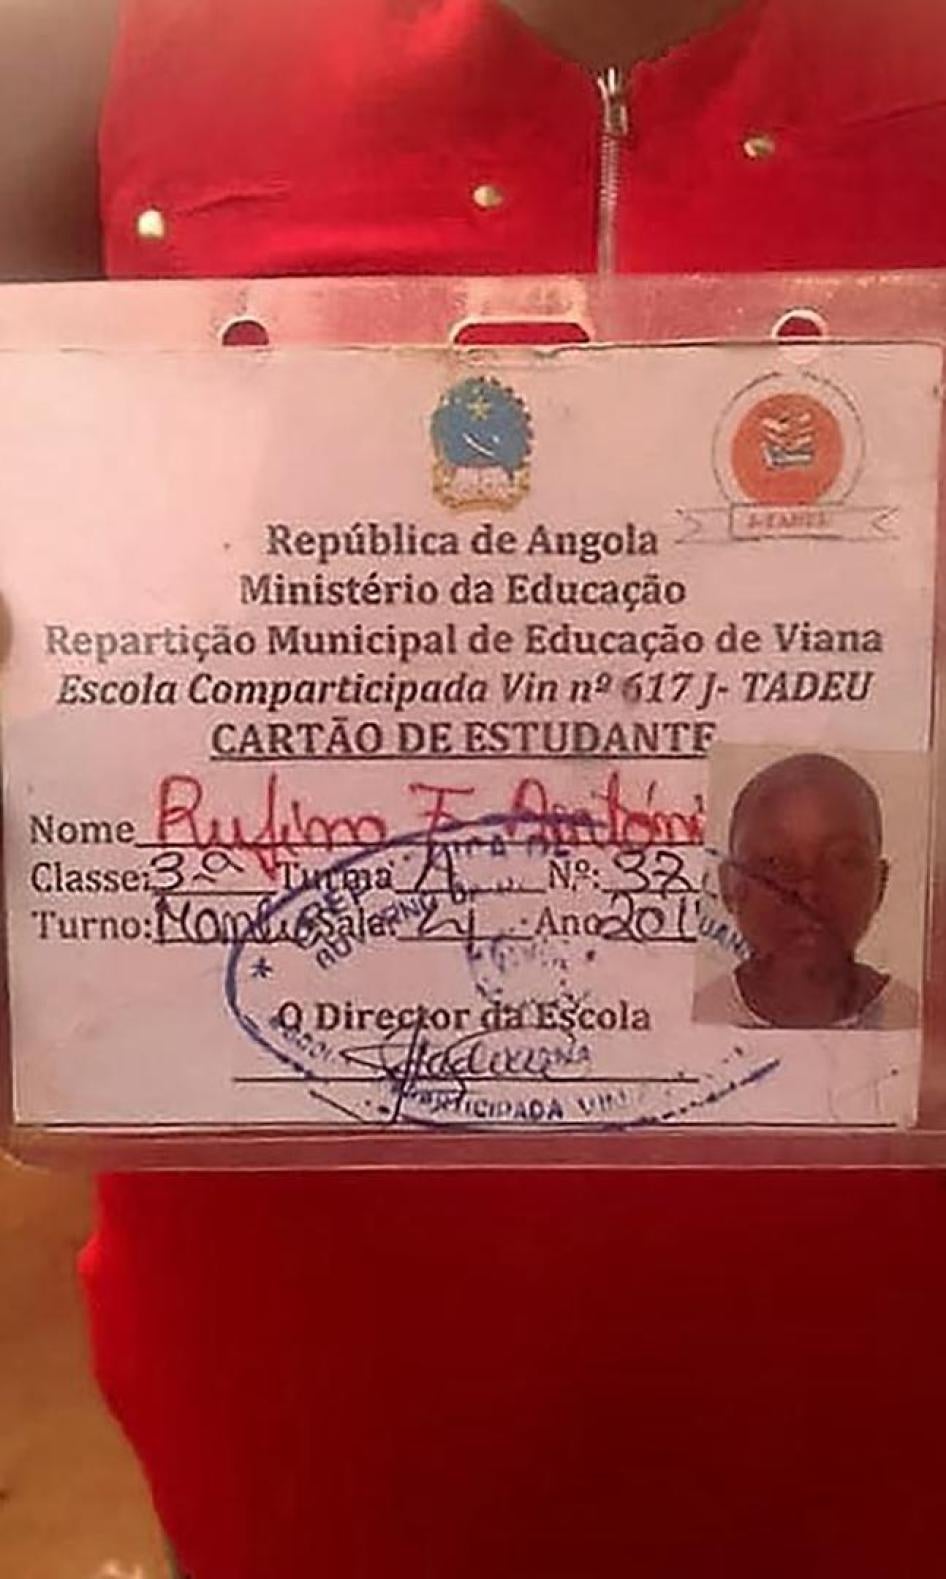 Student card of Rufino Antonio, 14, who was killed by gunfire from the military police during a peaceful protest against home demolitions on August 6, 2016 in Zango II, Luanda, Angola.